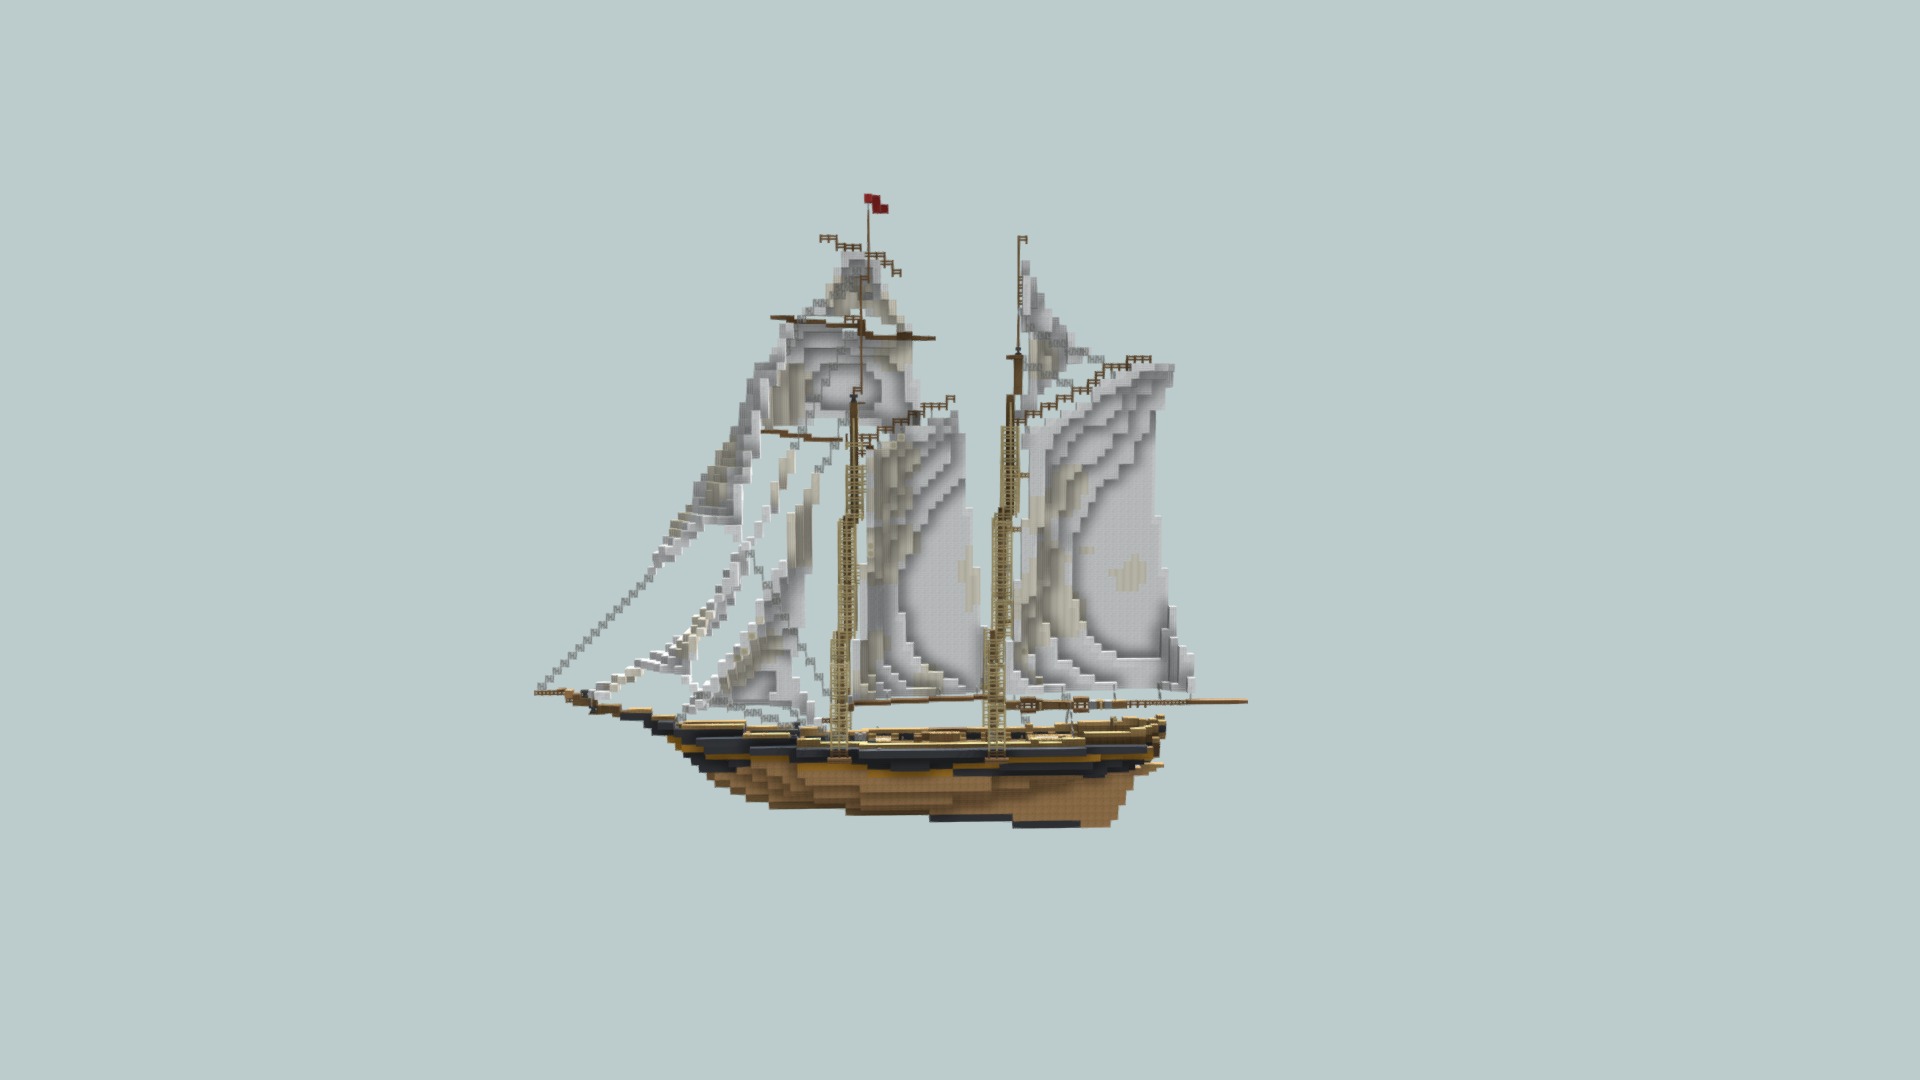 3D model Voxel Art sailing ship - This is a 3D model of the Voxel Art sailing ship. The 3D model is about a large metal structure.